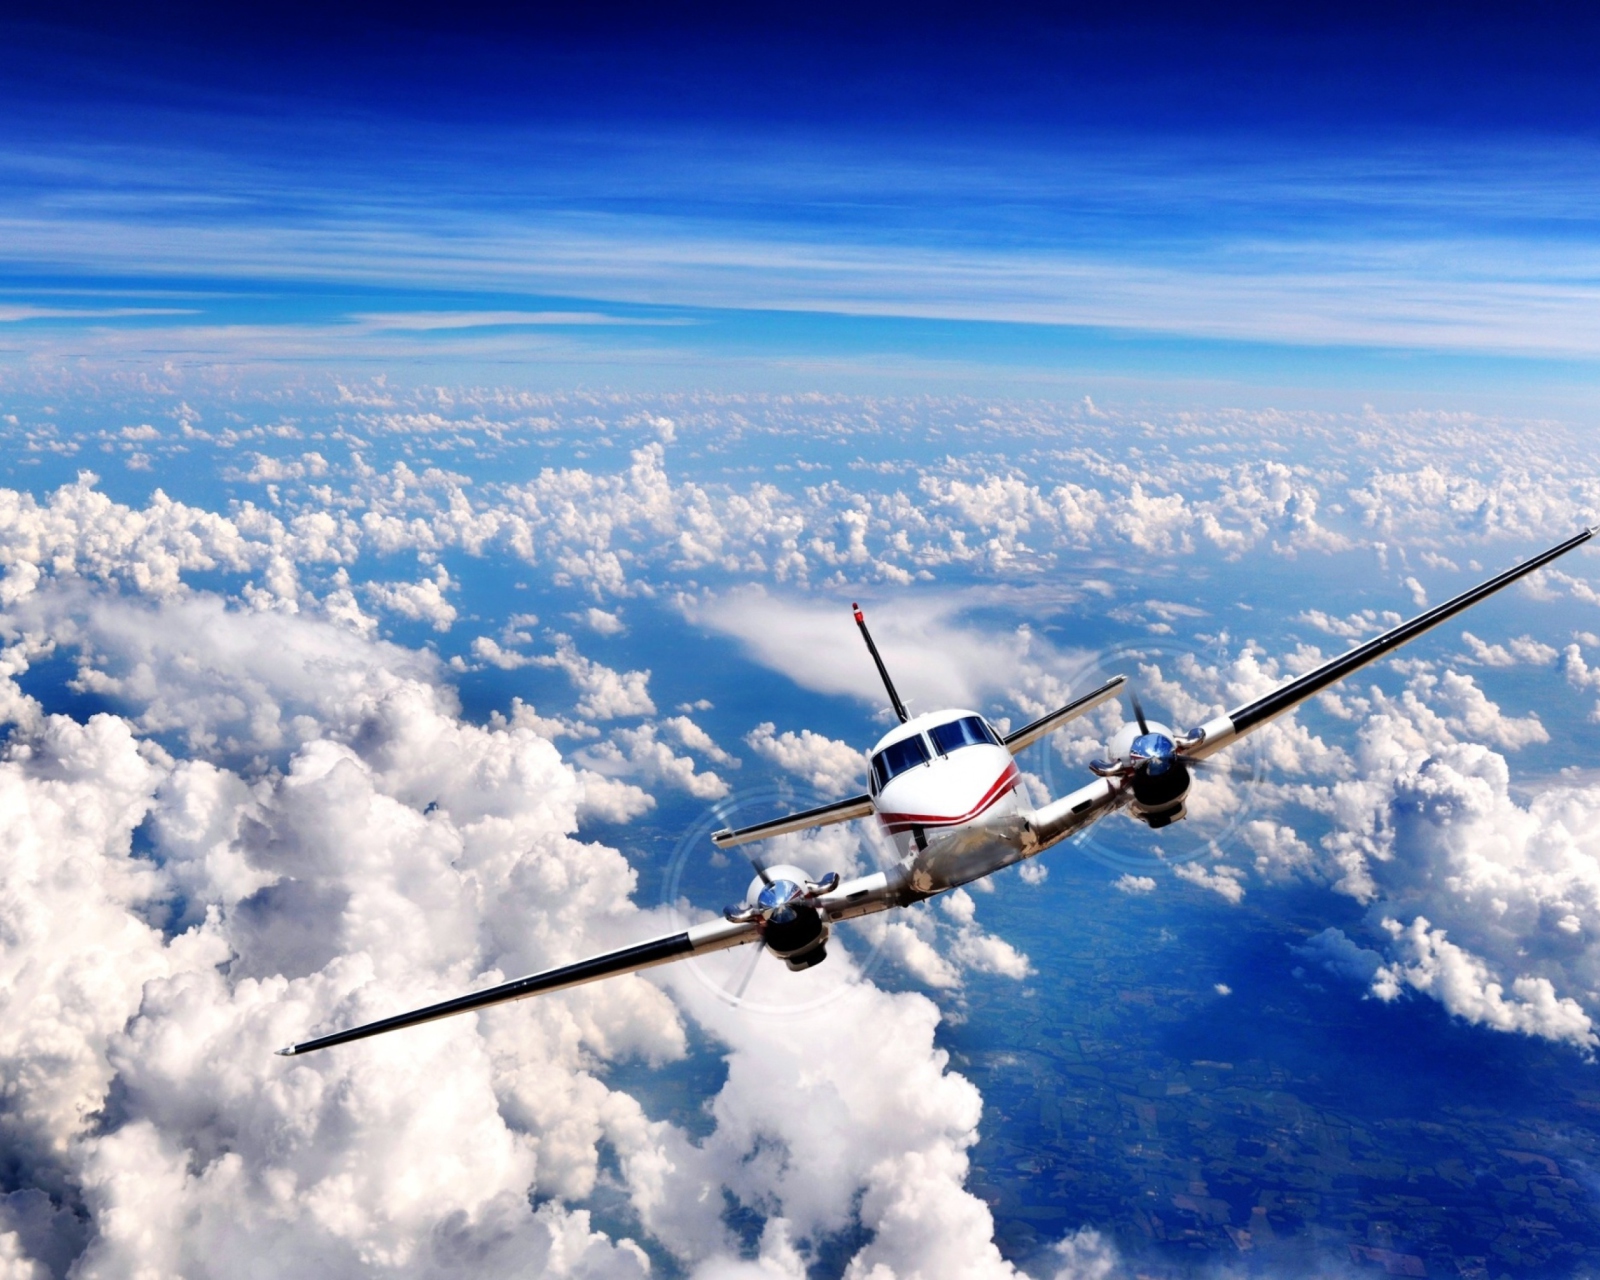 Plane Over The Clouds wallpaper 1600x1280